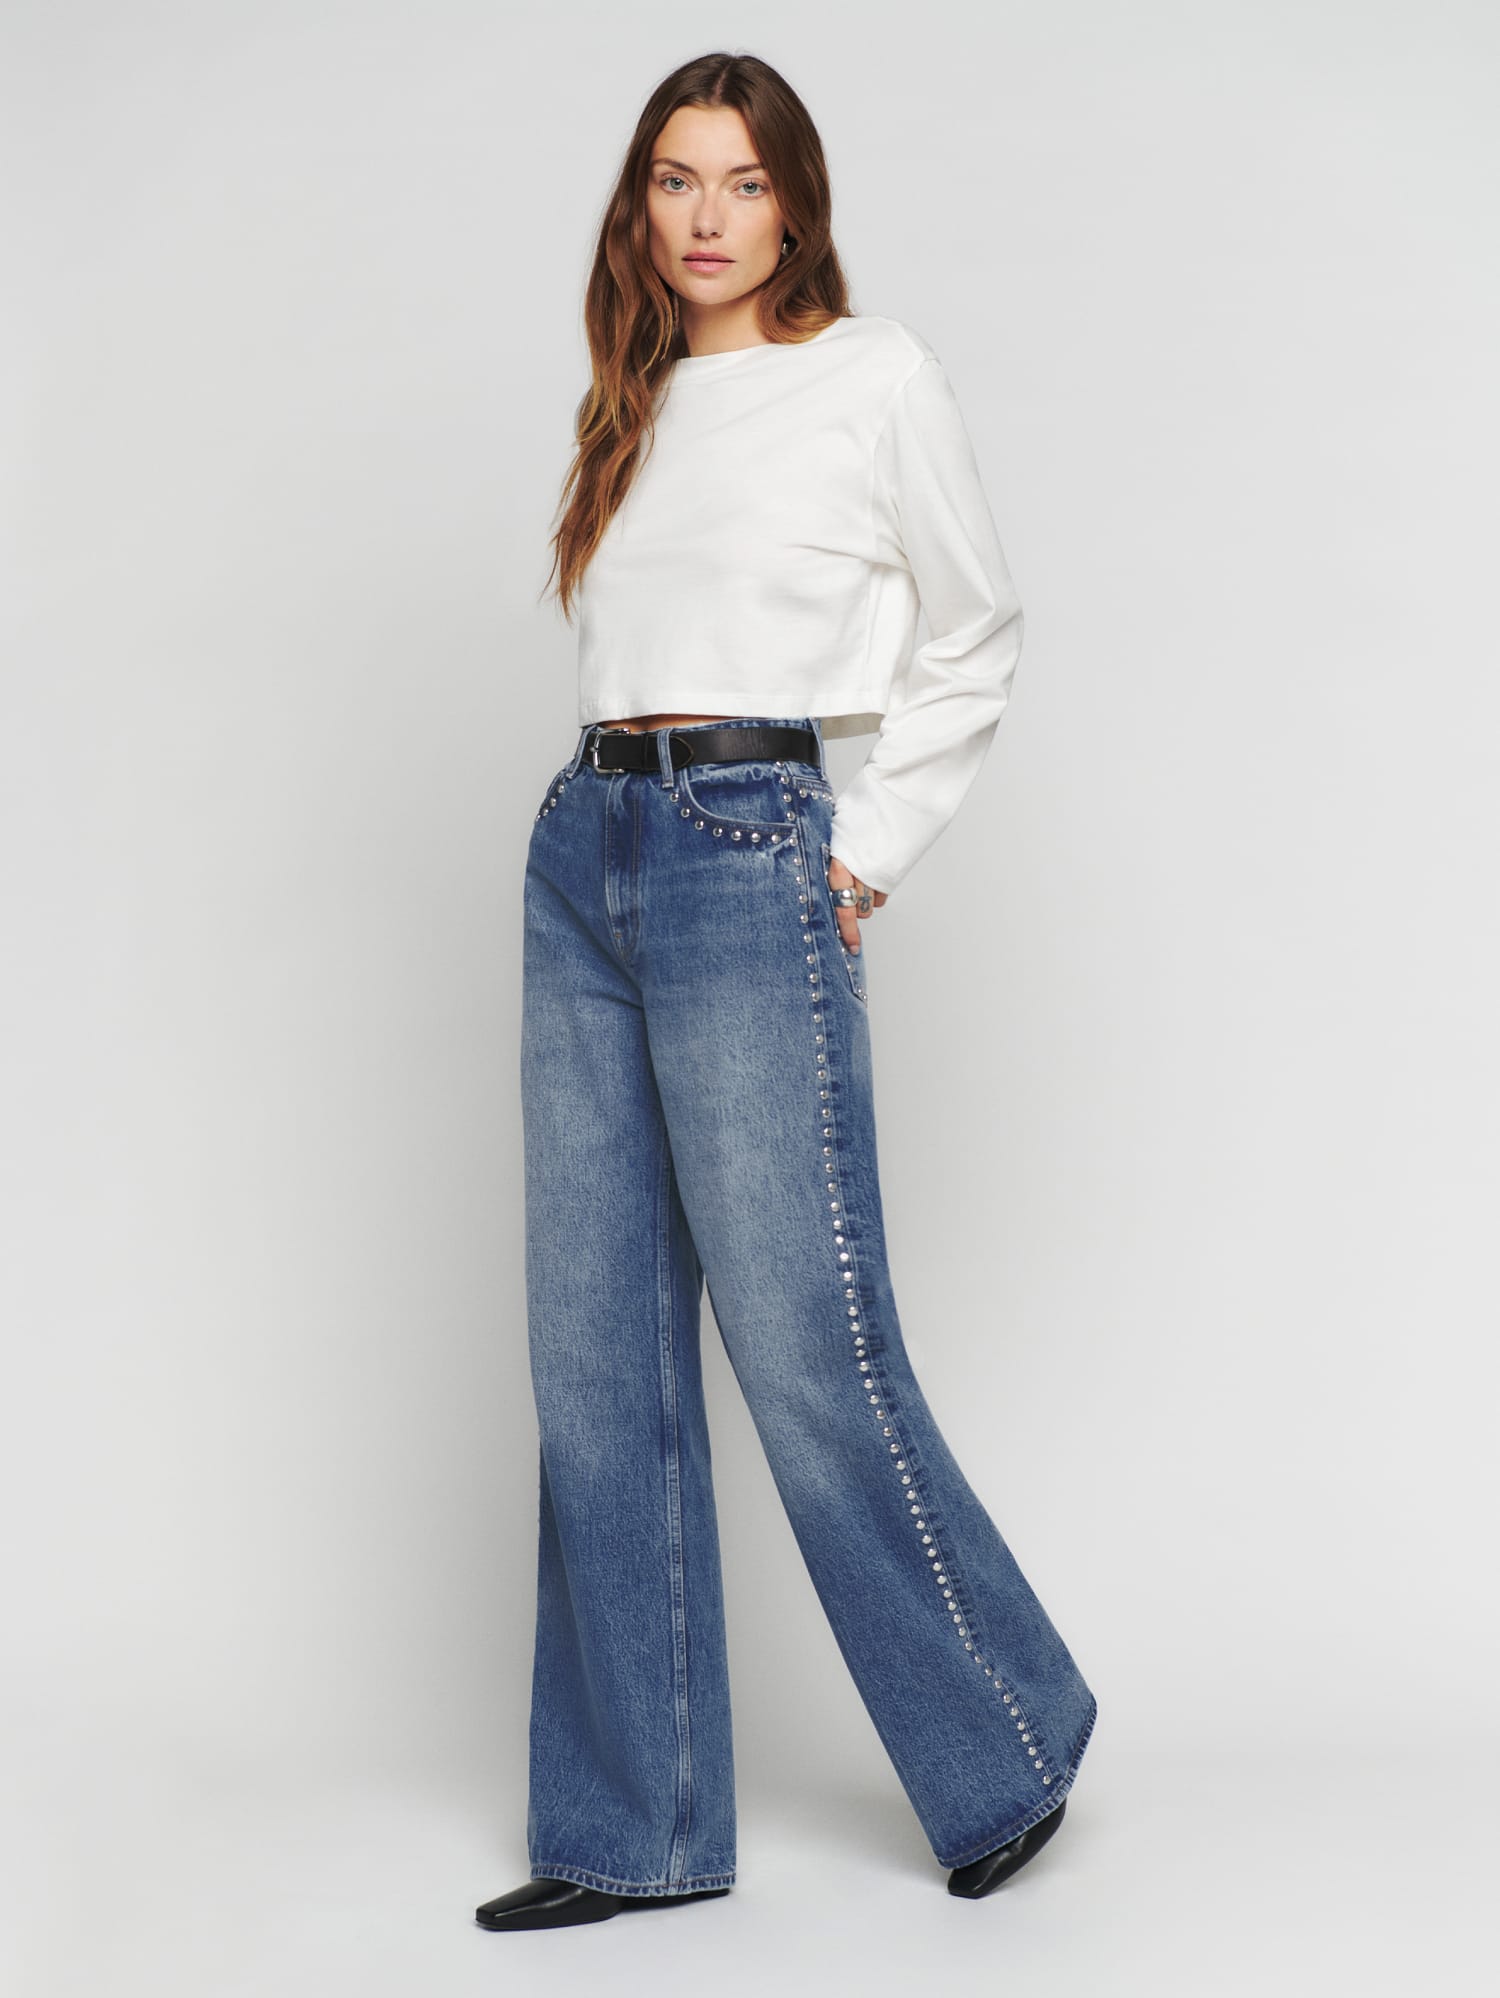 Wide Leg Pants With a High Waist in Tencel and Organic Cotton